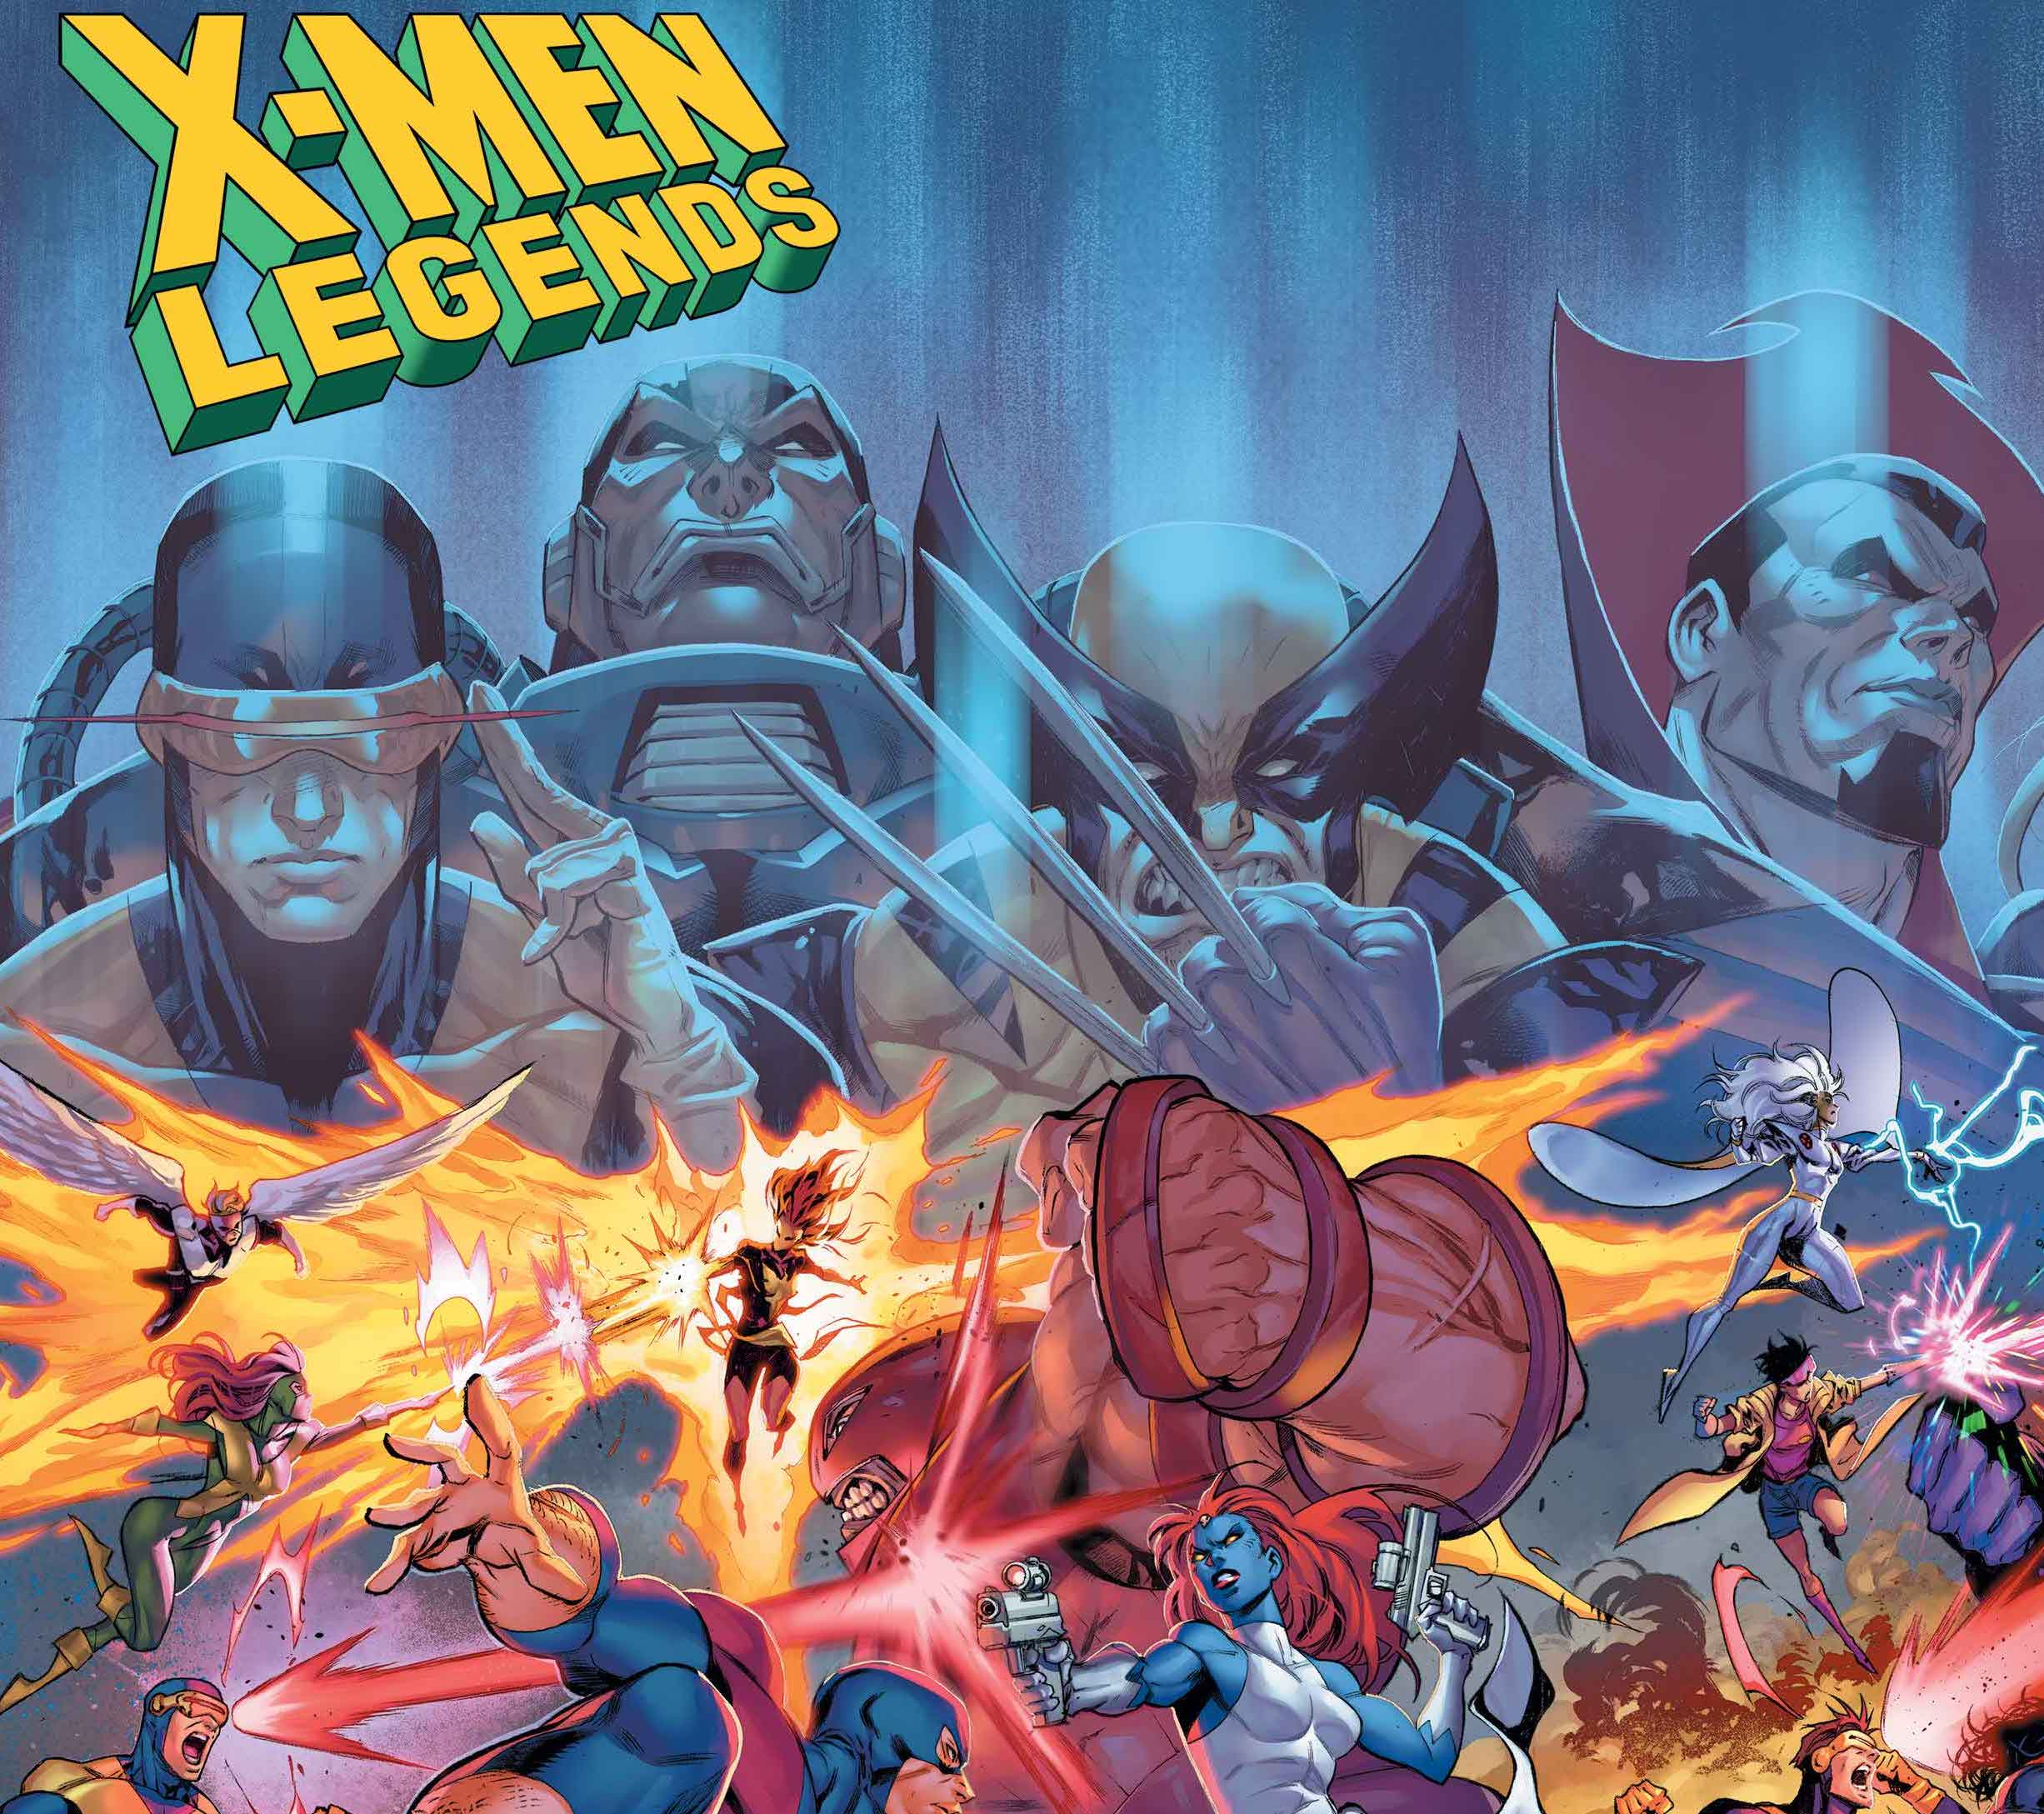 Marvel First Look: Iban Coello's 'X-Men Legends' connecting cover